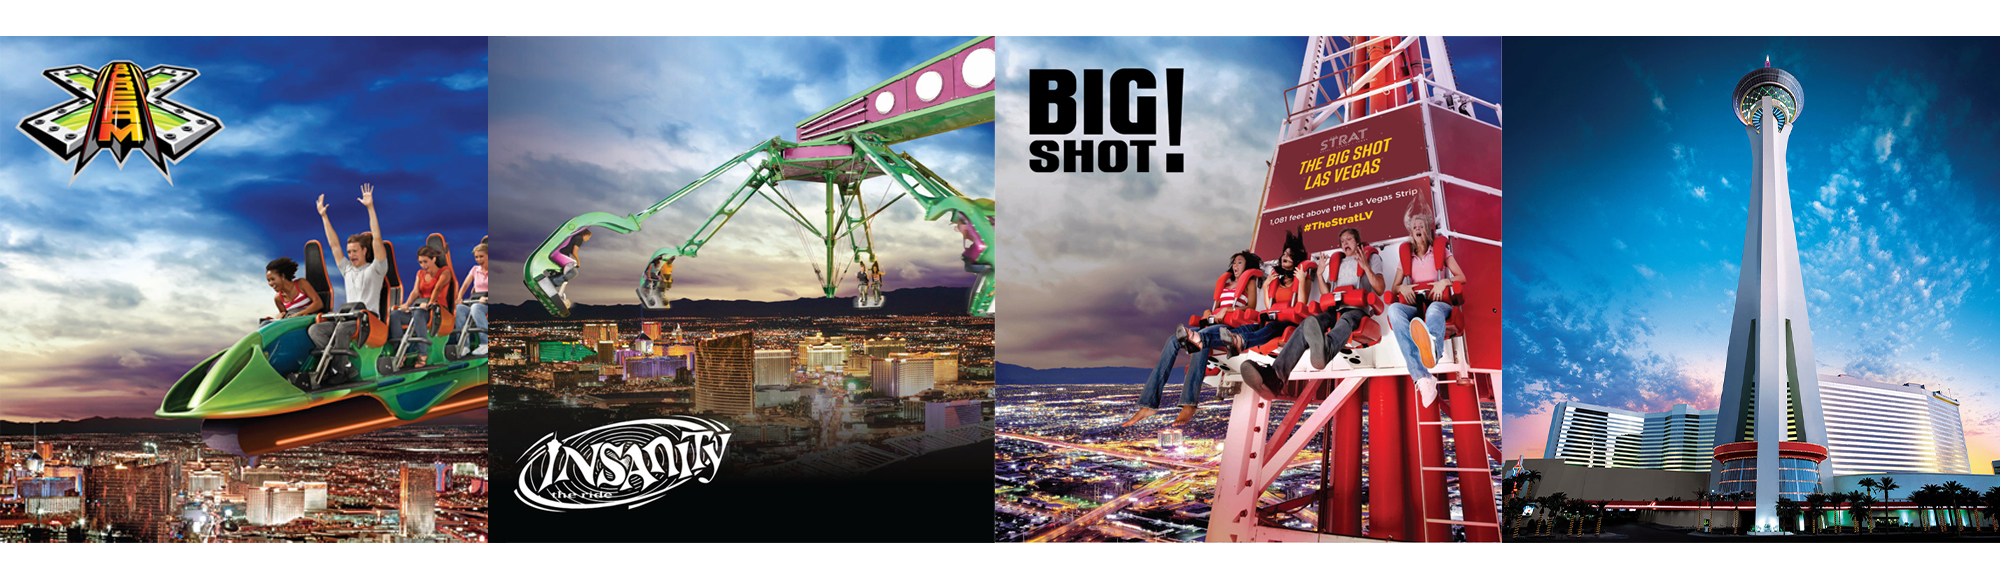 STRAT SkyPod and Thrill Rides attraction